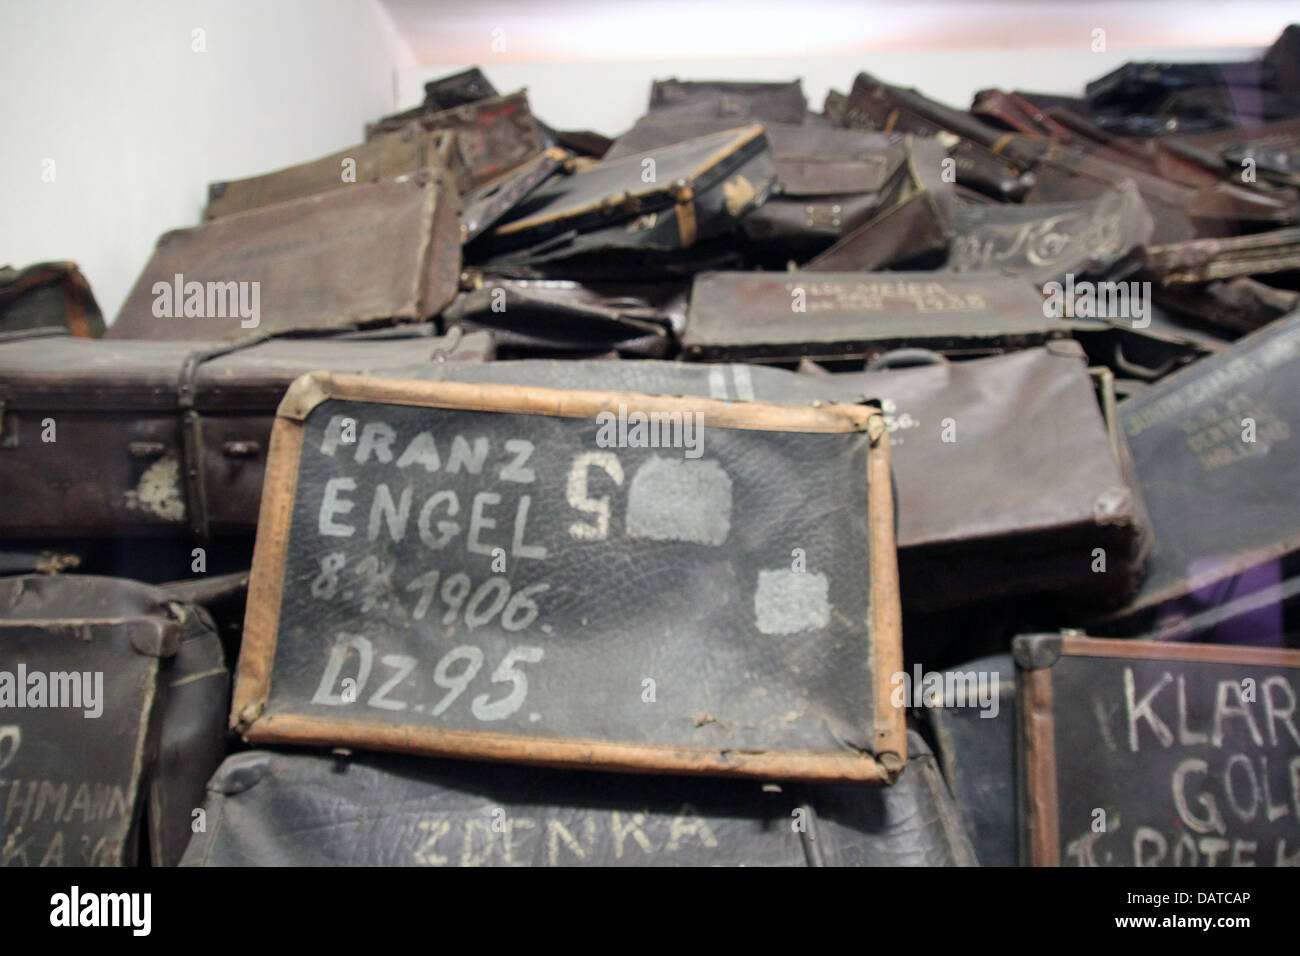 Behind a display glass, suitcases of Jewish victims of the Holocaust at Auschwitz-Birkenau concentration camp near Krakow. Stock Photo